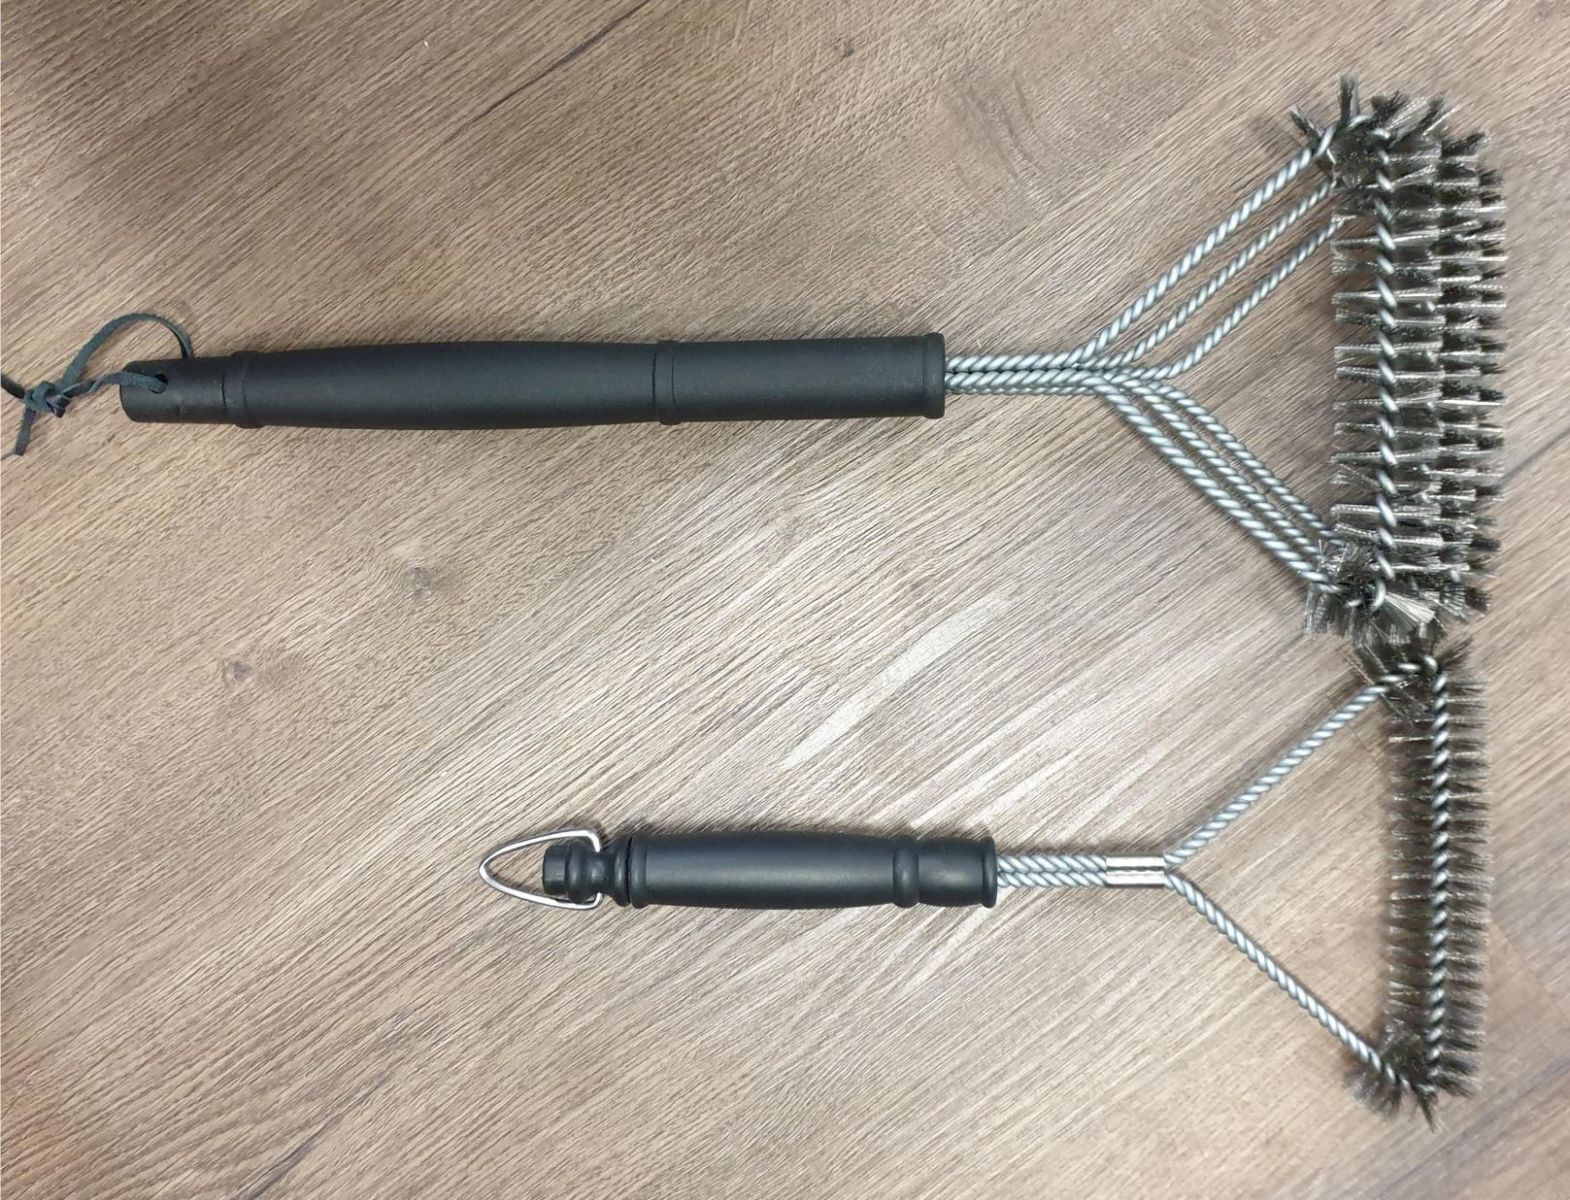 This is a picture comparing your standard BBQ cleaning Brush to the Flaming coals BBQ Grill Brush